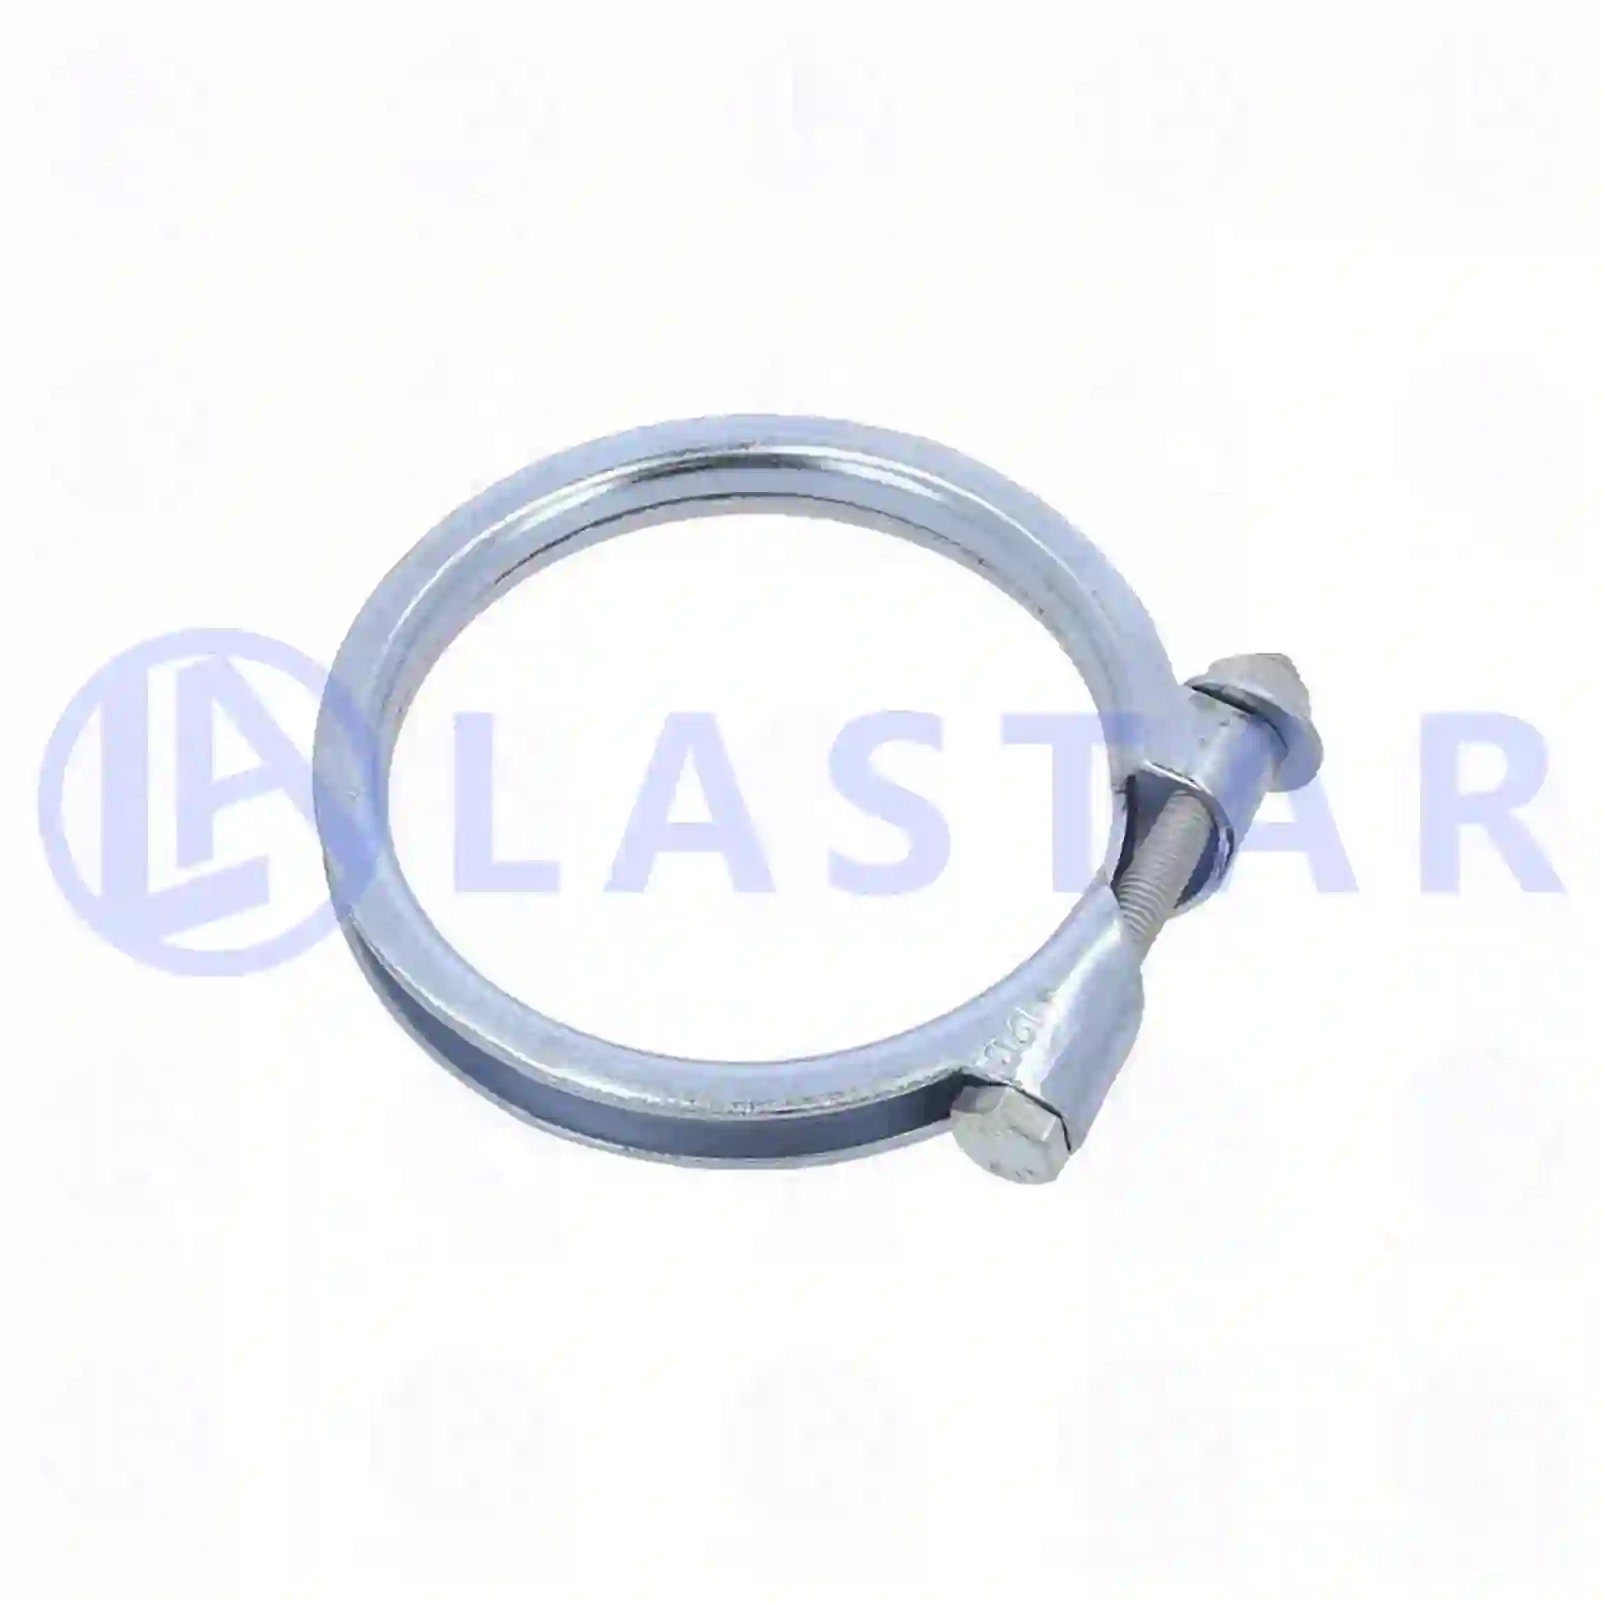 Clamp, 77706174, 1512843, 1335720, 1589141, ZG10258-0008 ||  77706174 Lastar Spare Part | Truck Spare Parts, Auotomotive Spare Parts Clamp, 77706174, 1512843, 1335720, 1589141, ZG10258-0008 ||  77706174 Lastar Spare Part | Truck Spare Parts, Auotomotive Spare Parts